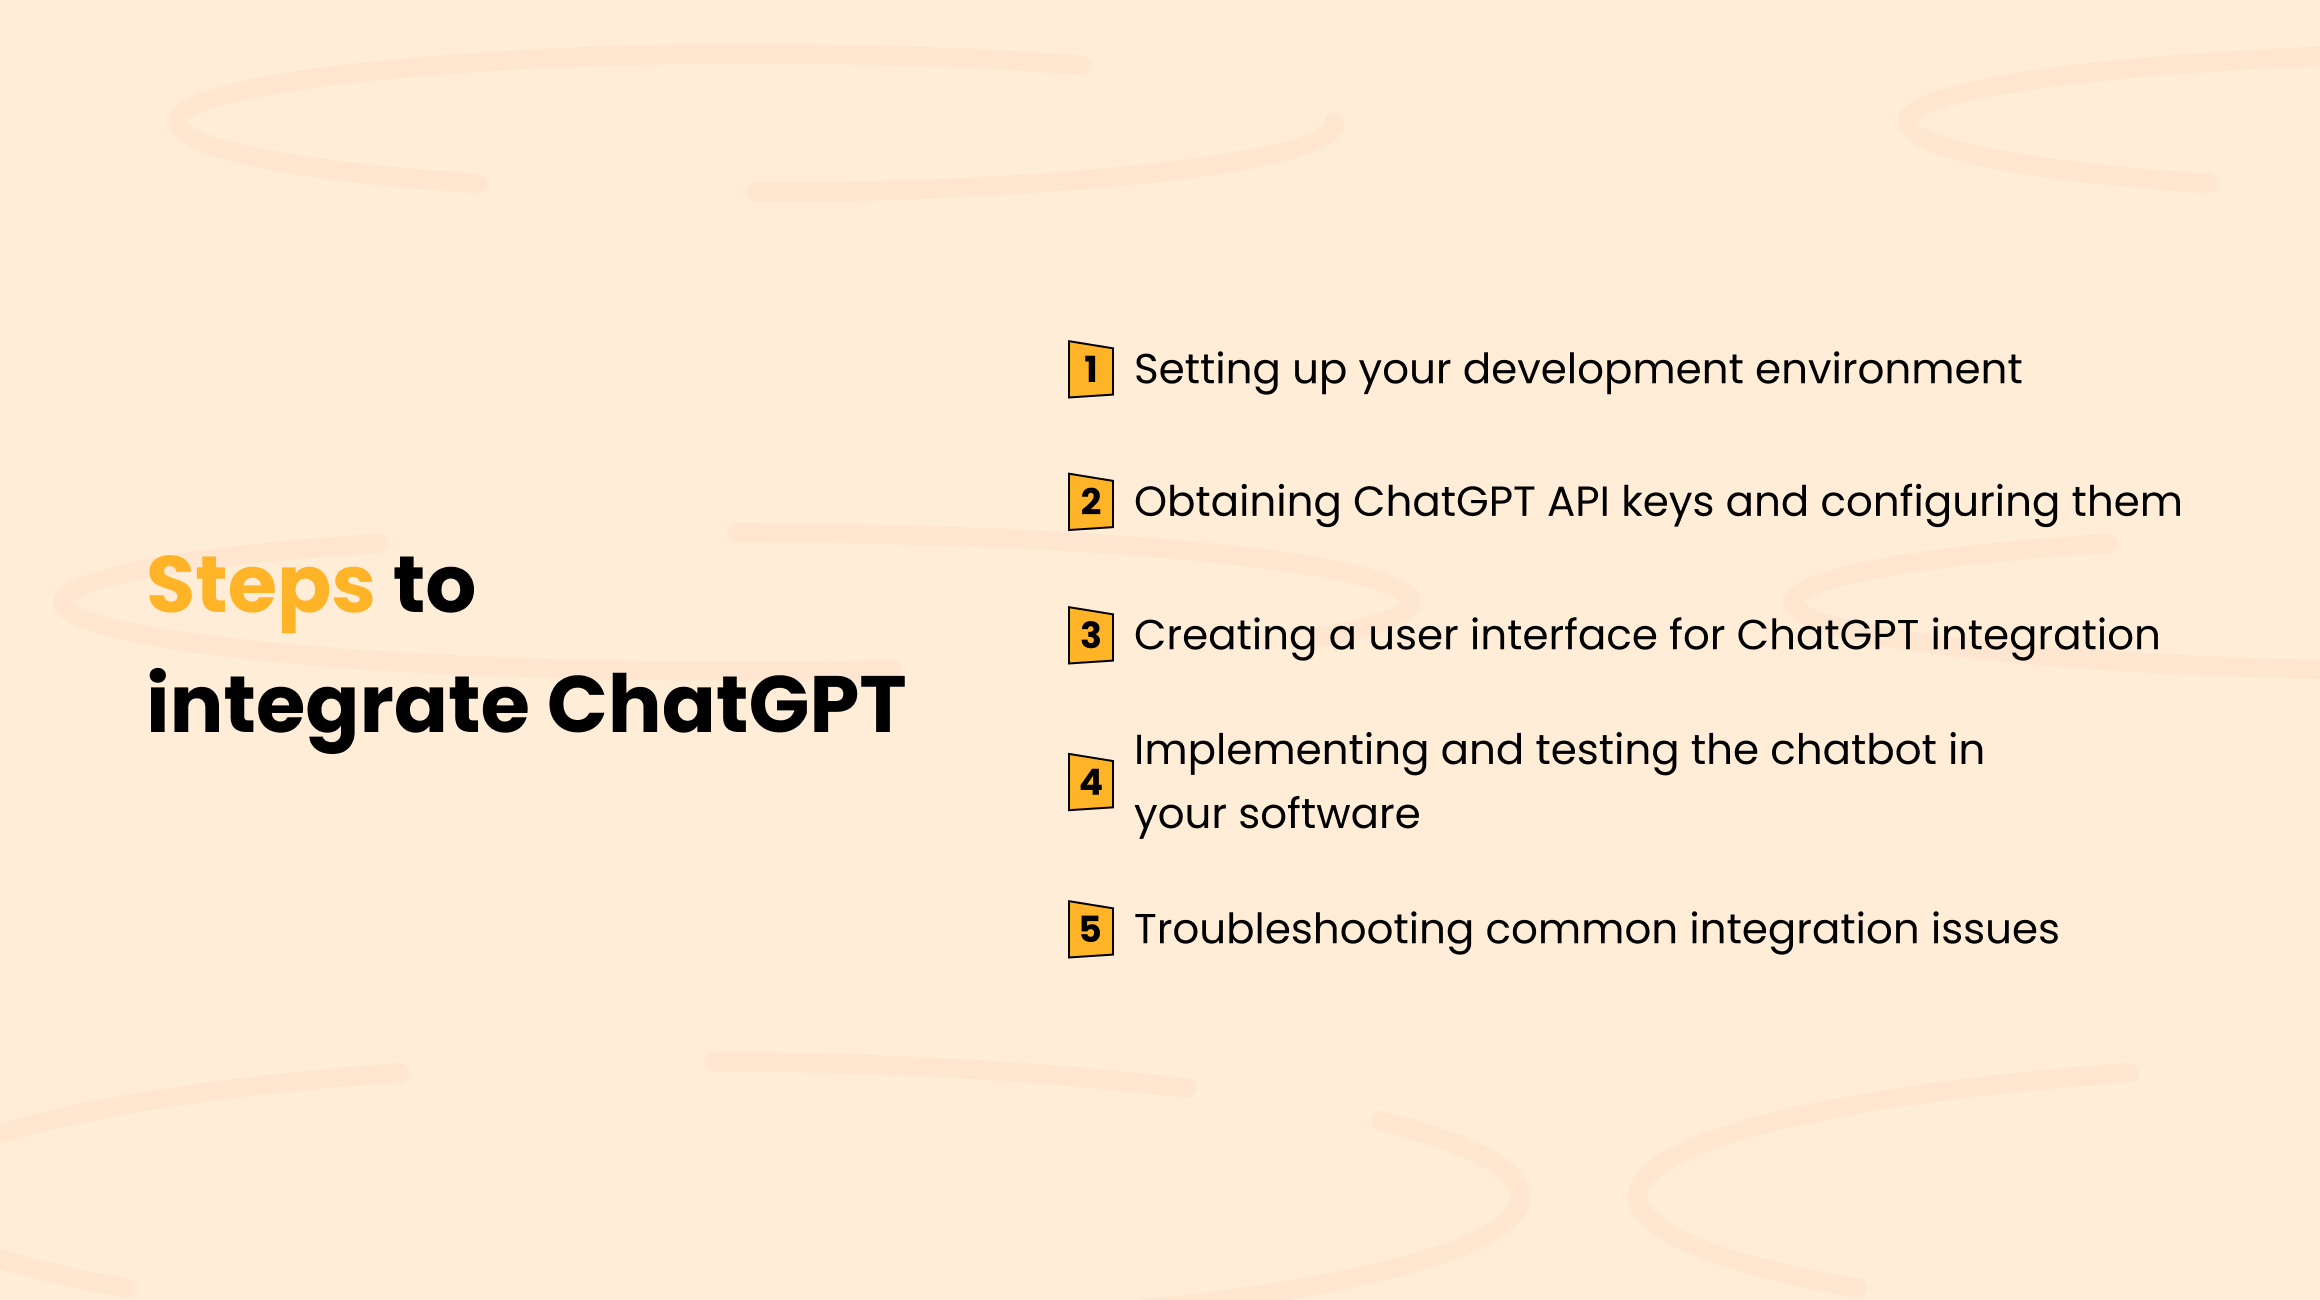 Steps to Integrate ChatGPT